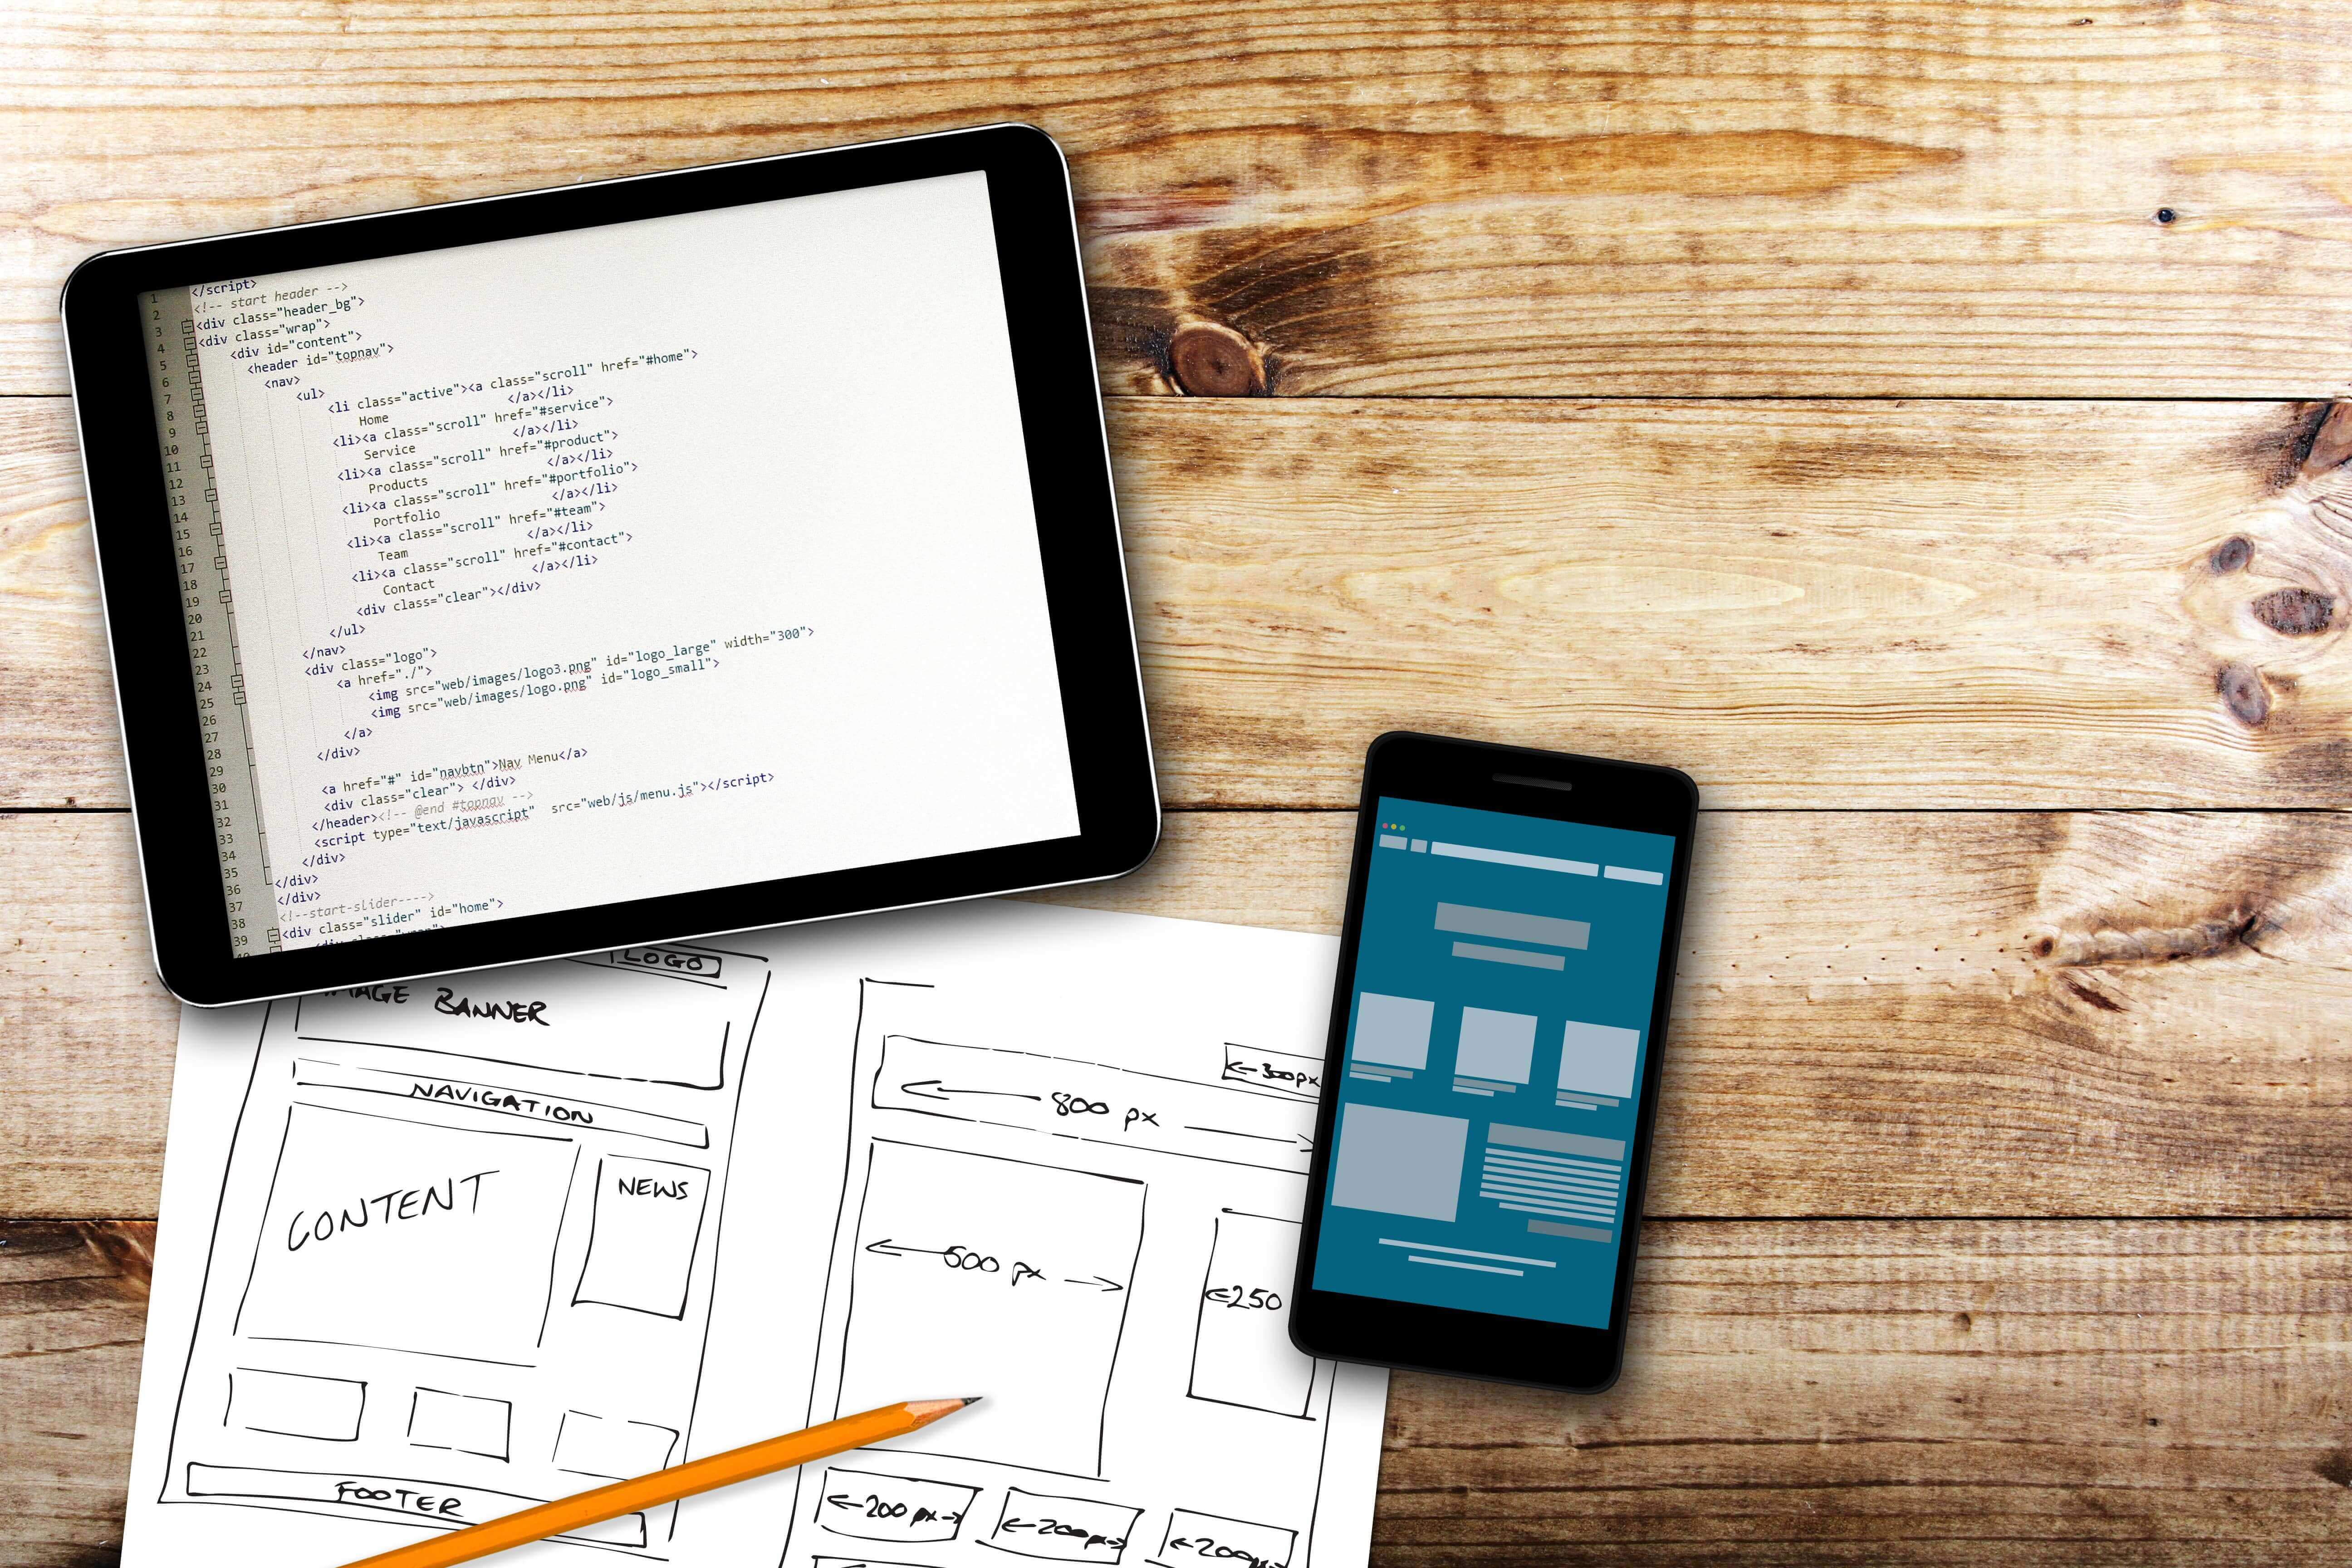 codes and app design shown on tablet and mobile device